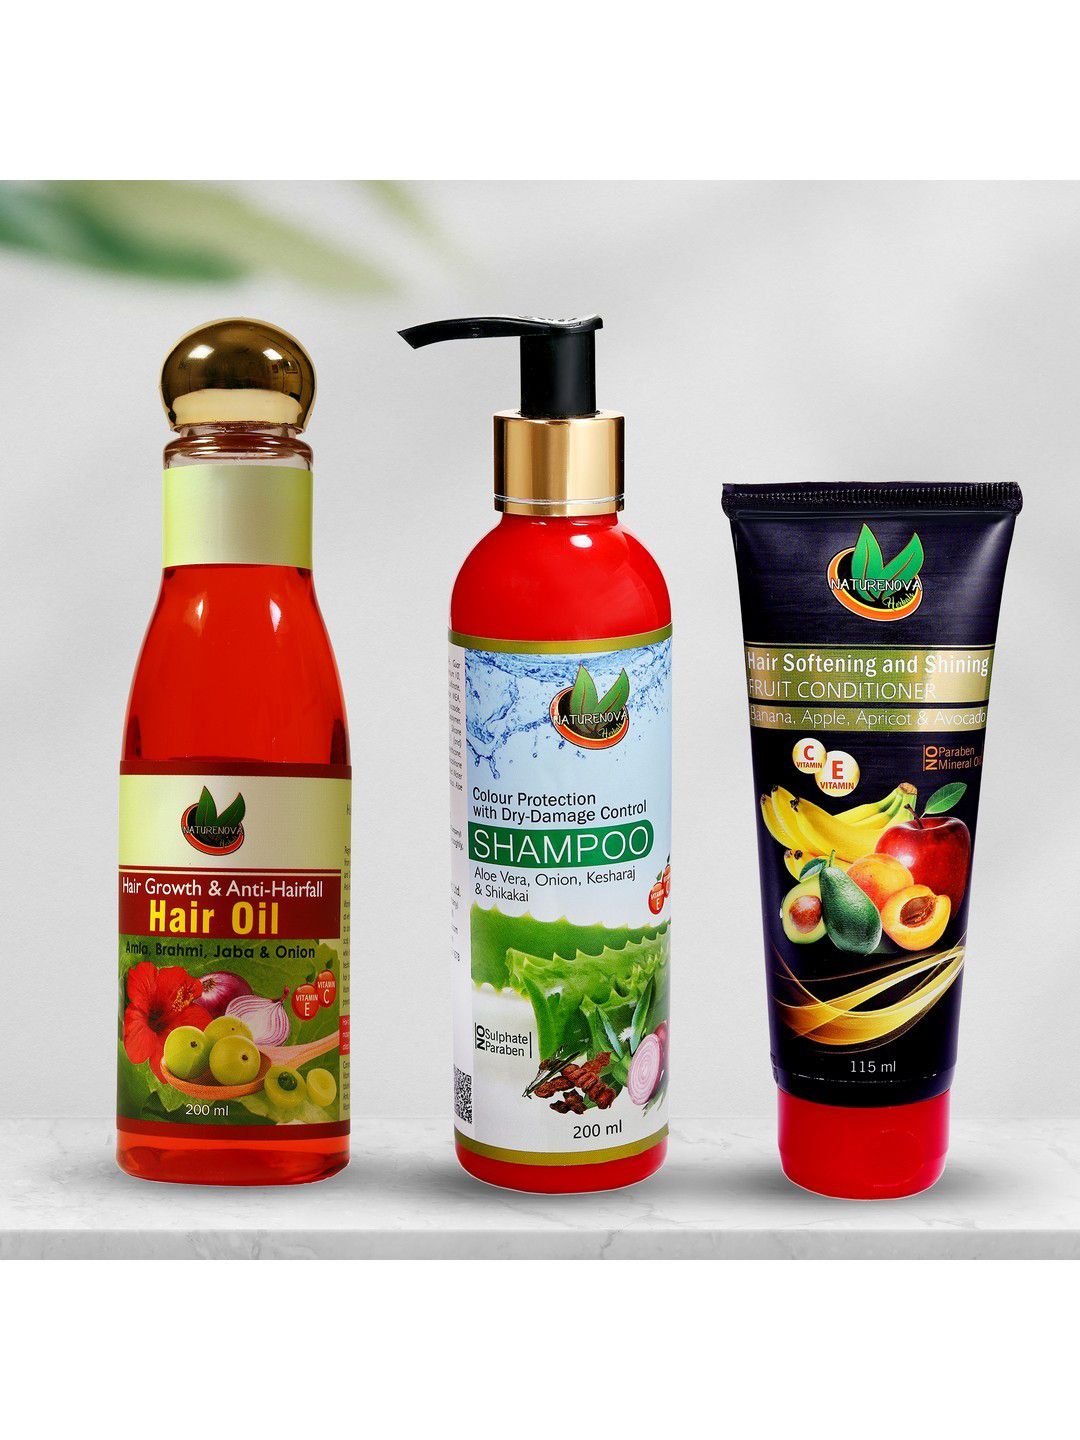 NatureNova Herbals Set of Colour Protect Shampoo - Fruit Conditioner - Anti-Hairfall Oil Price in India